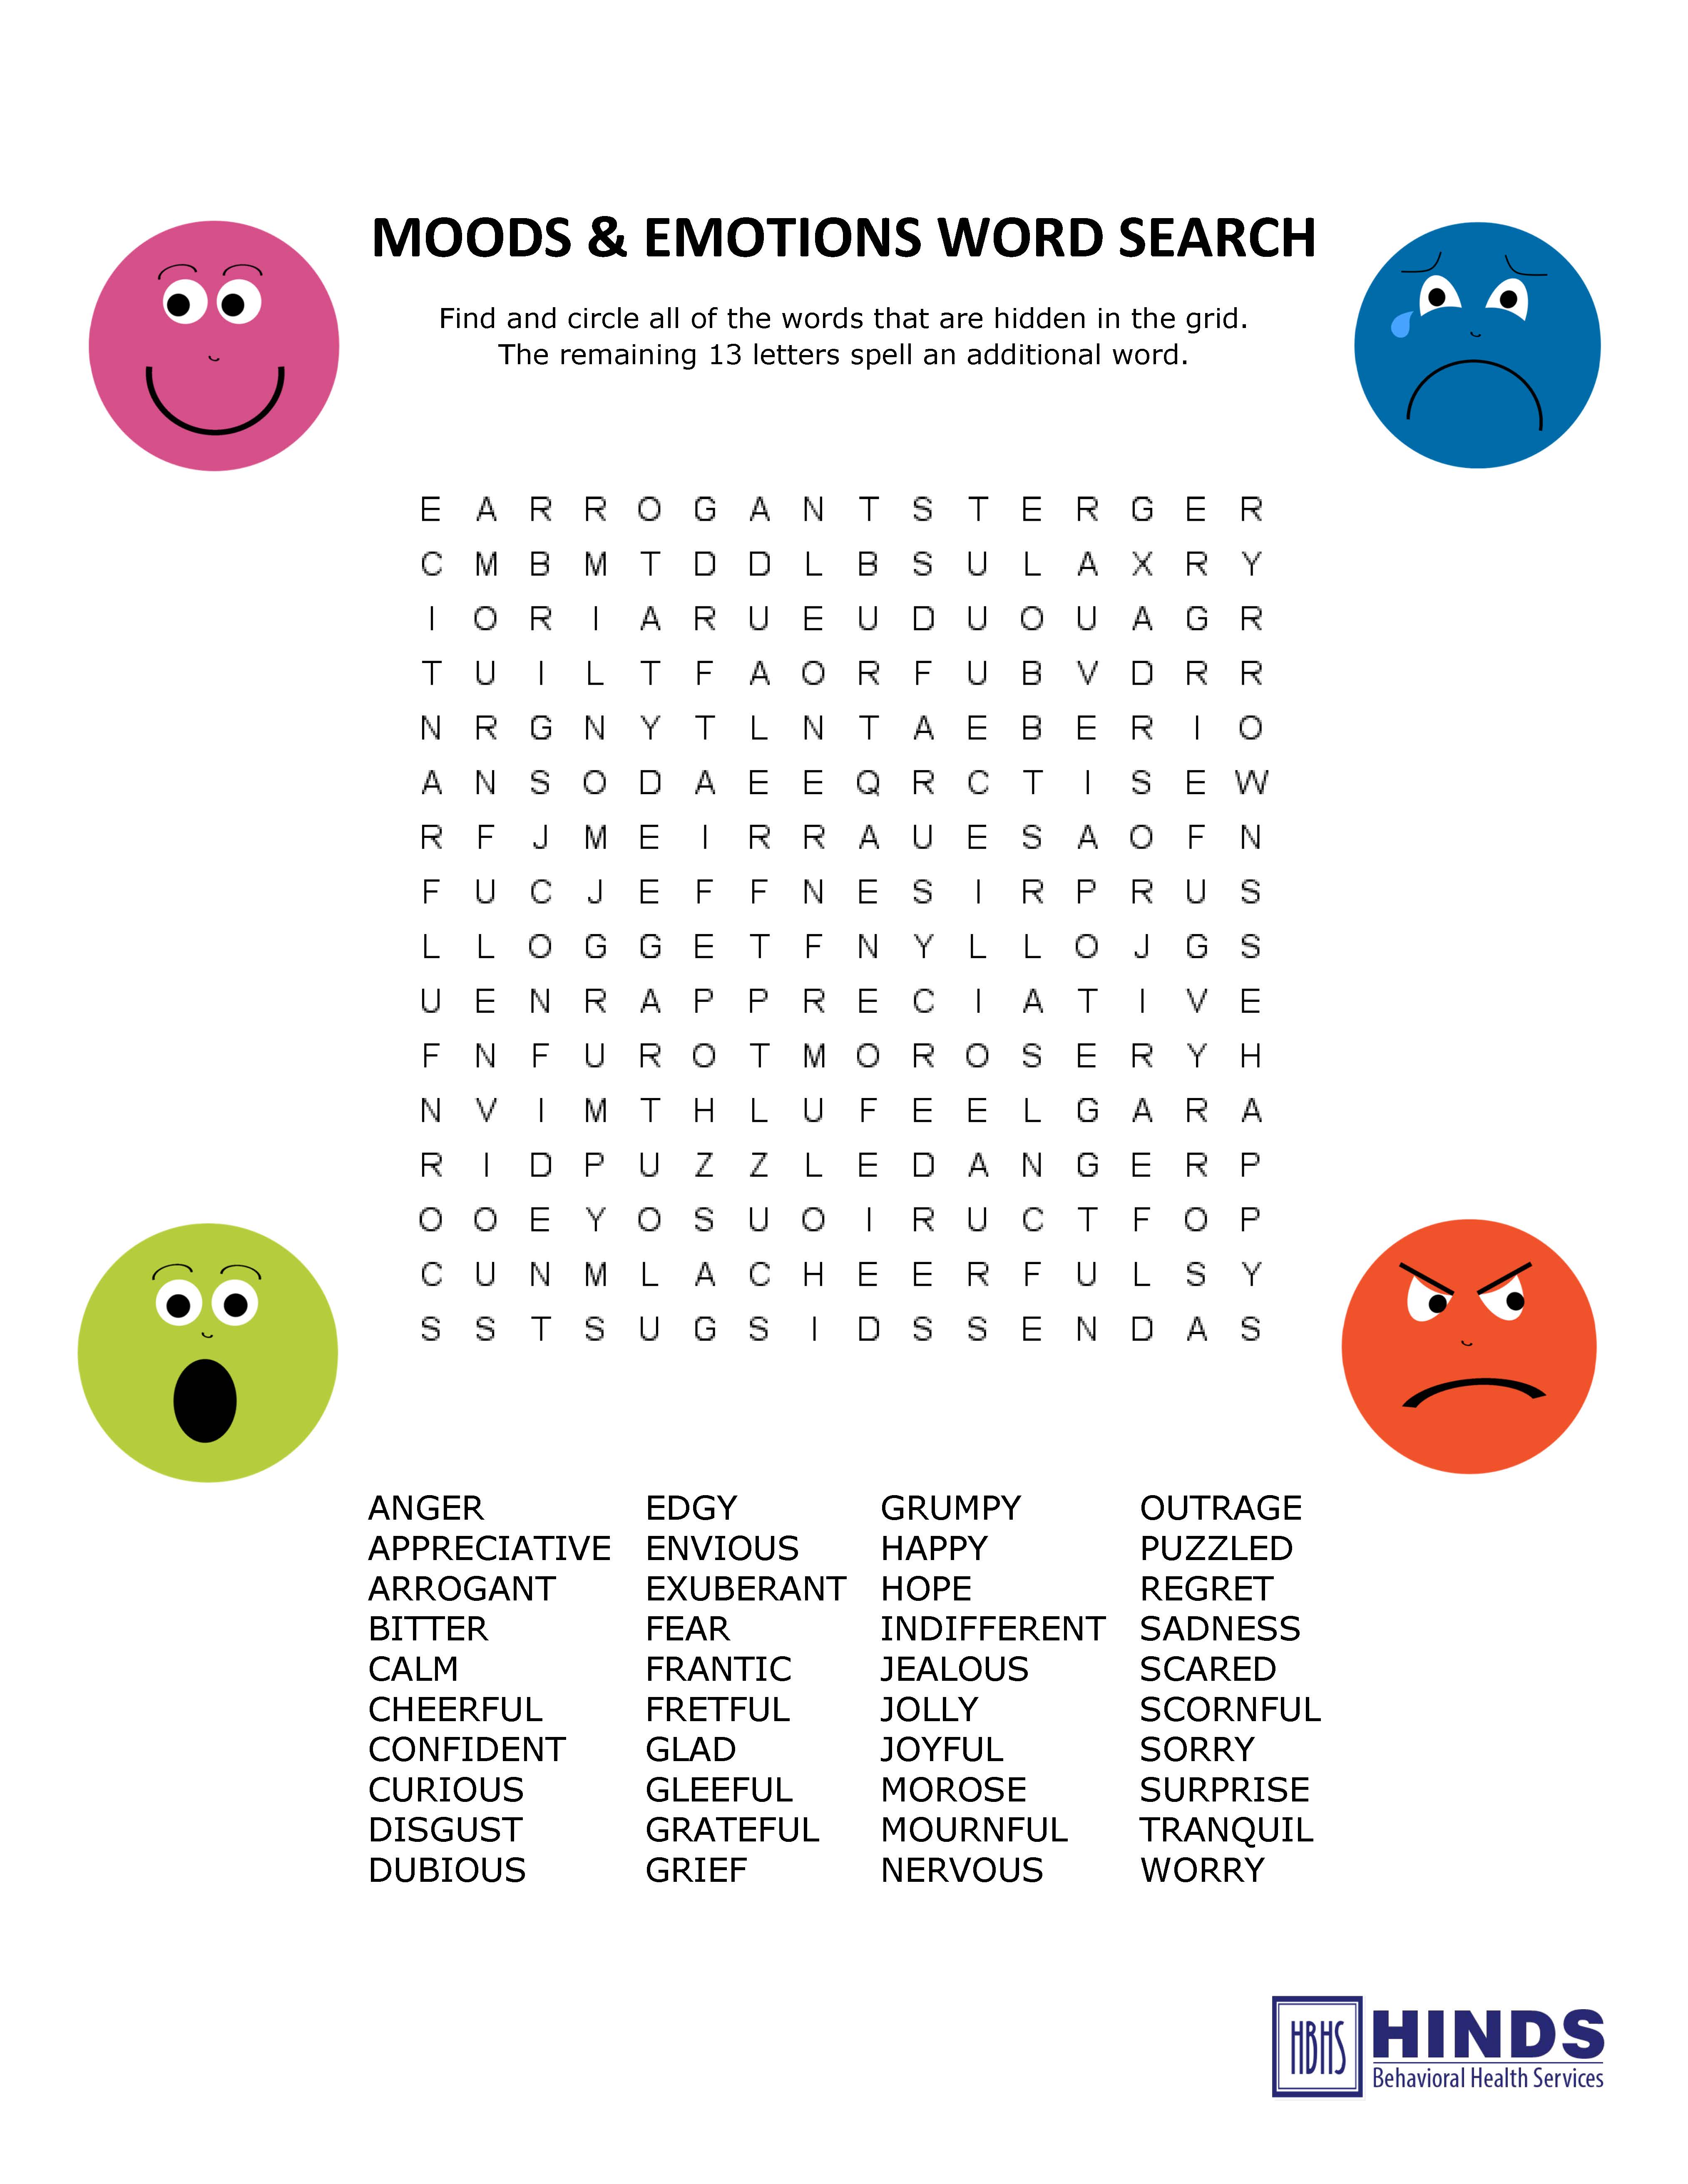 moods-emotions-word-search-hinds-behavioral-health-services-region-9